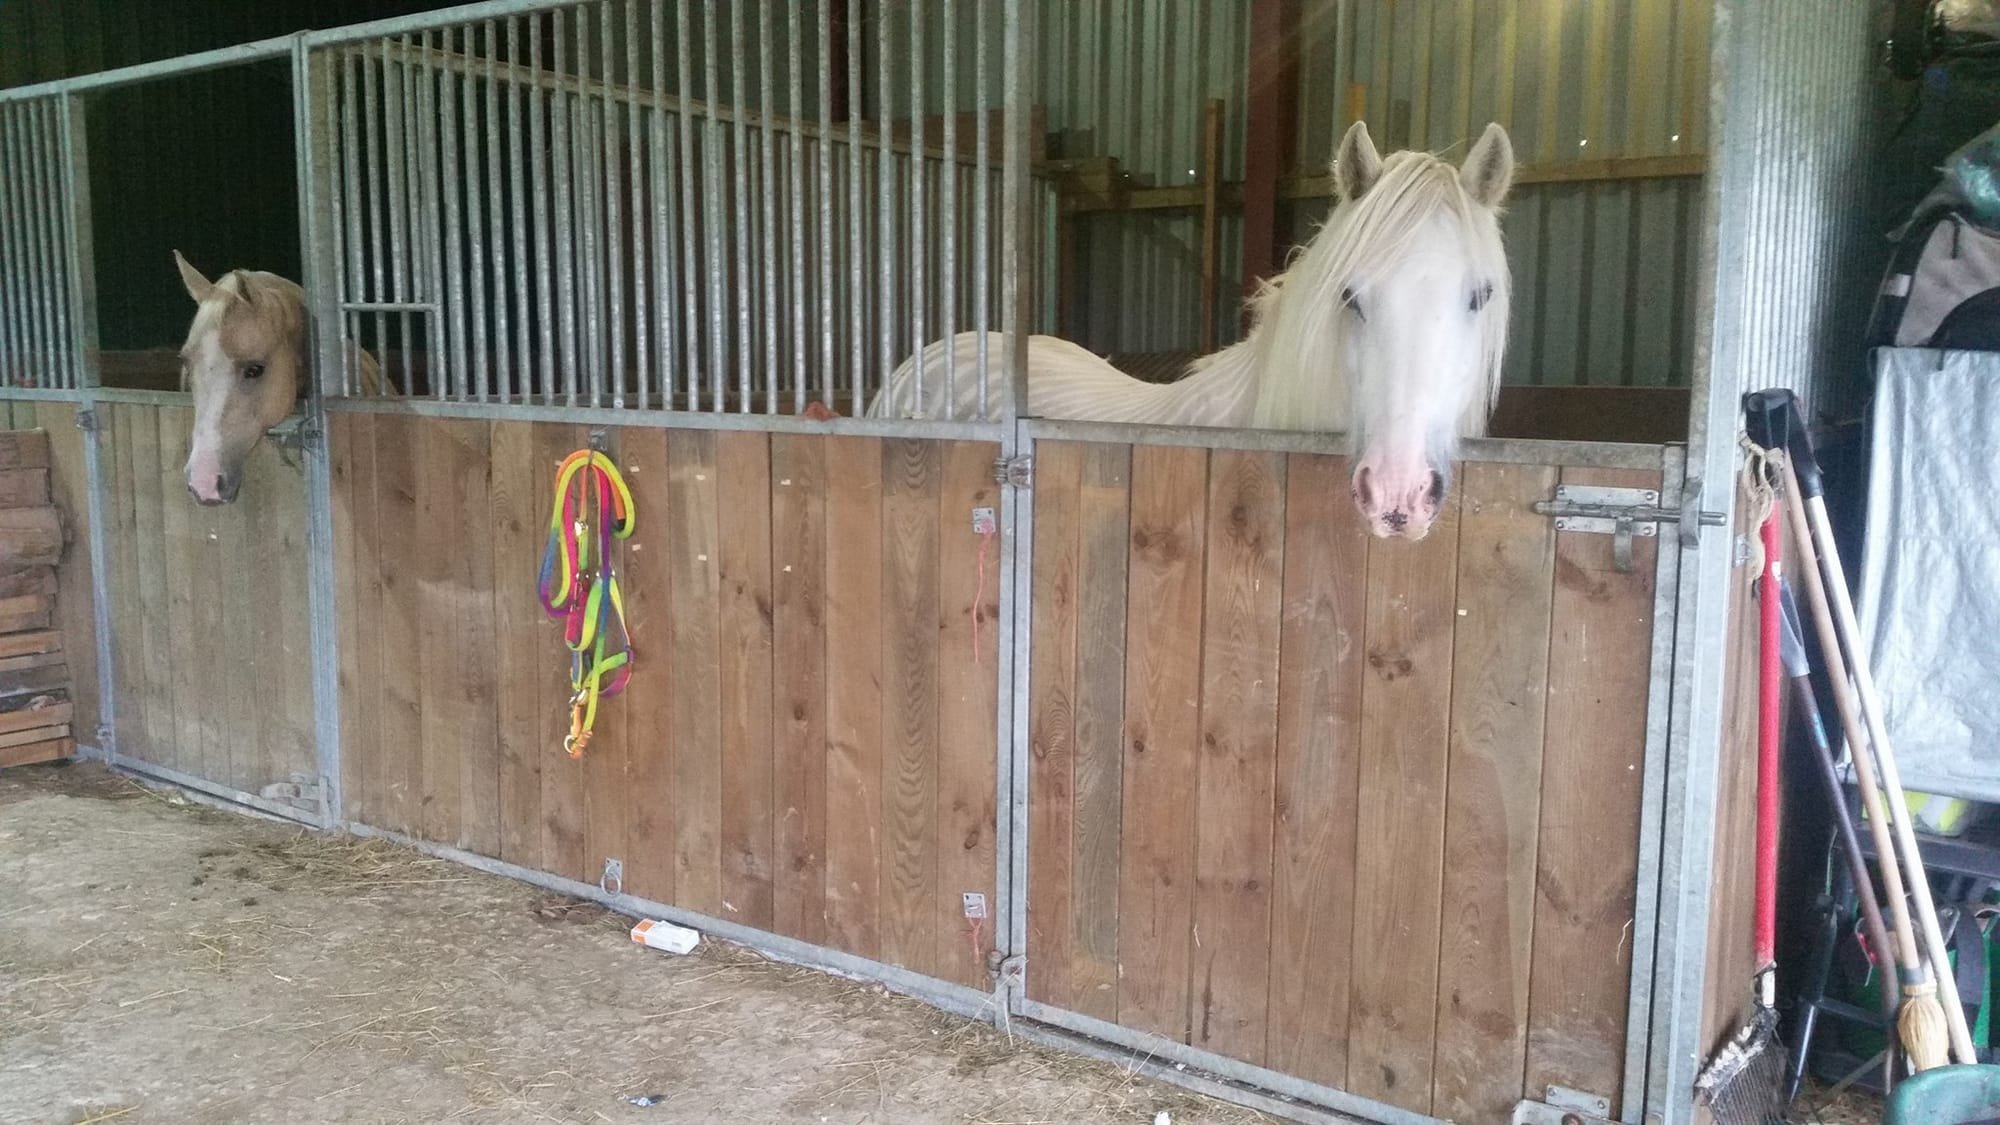 Internal stables for emergency use/box rest